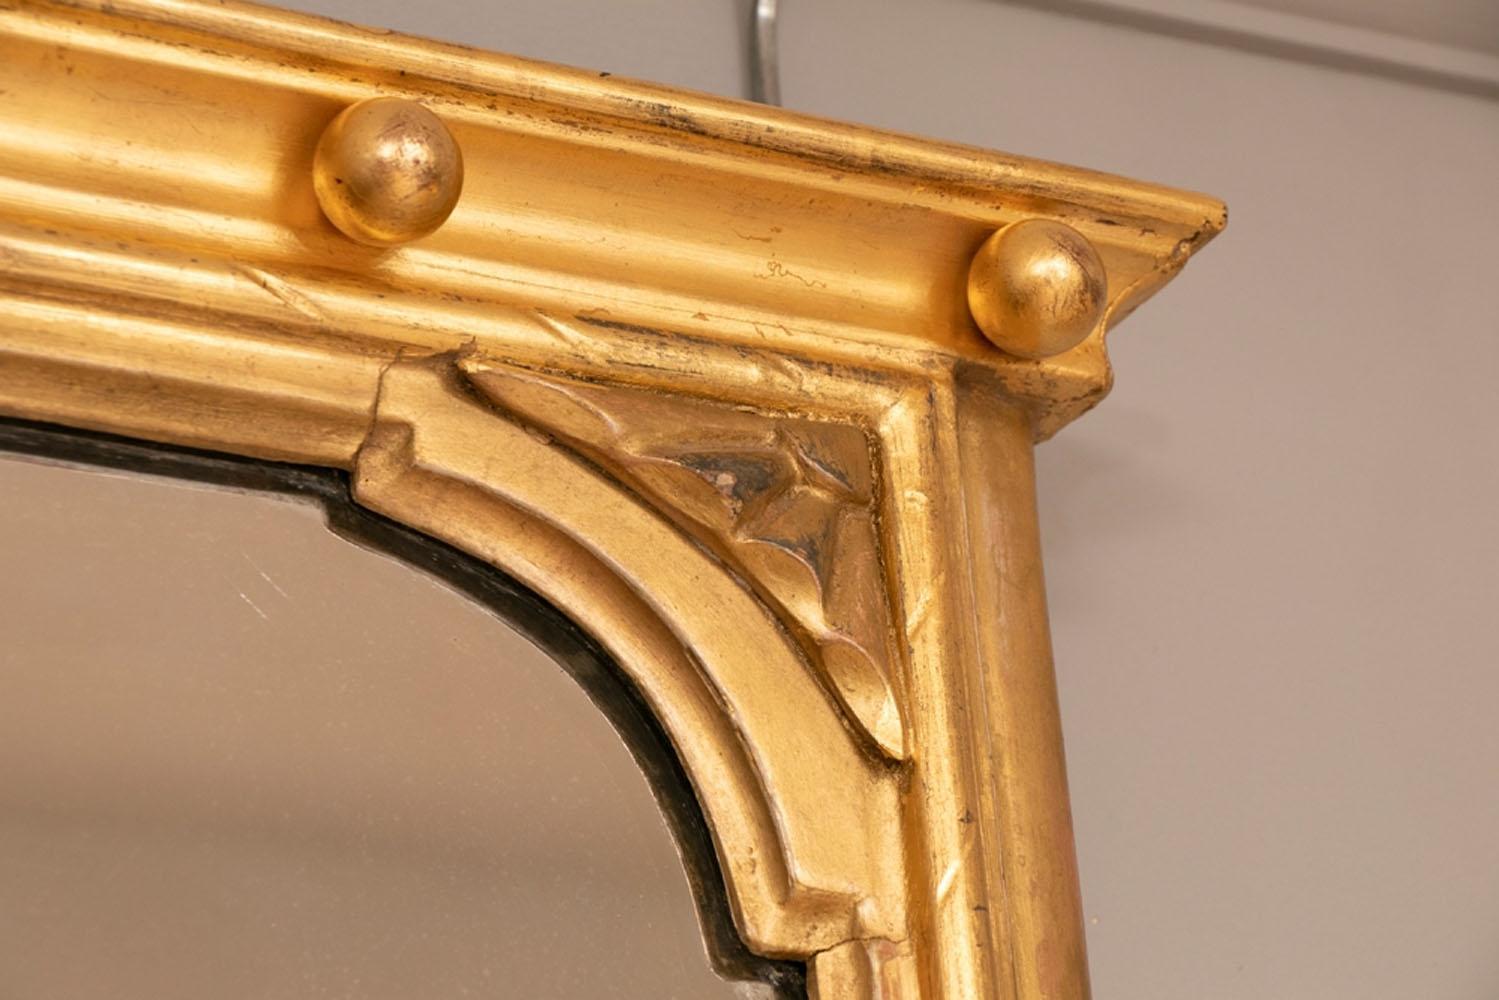 English antique giltwood overmantle mirror, circa 1880. Superb quality 23.5-carat genuine gold leaf gilding. Original mirror plate with little foxing, original backing boards and hanging plates.